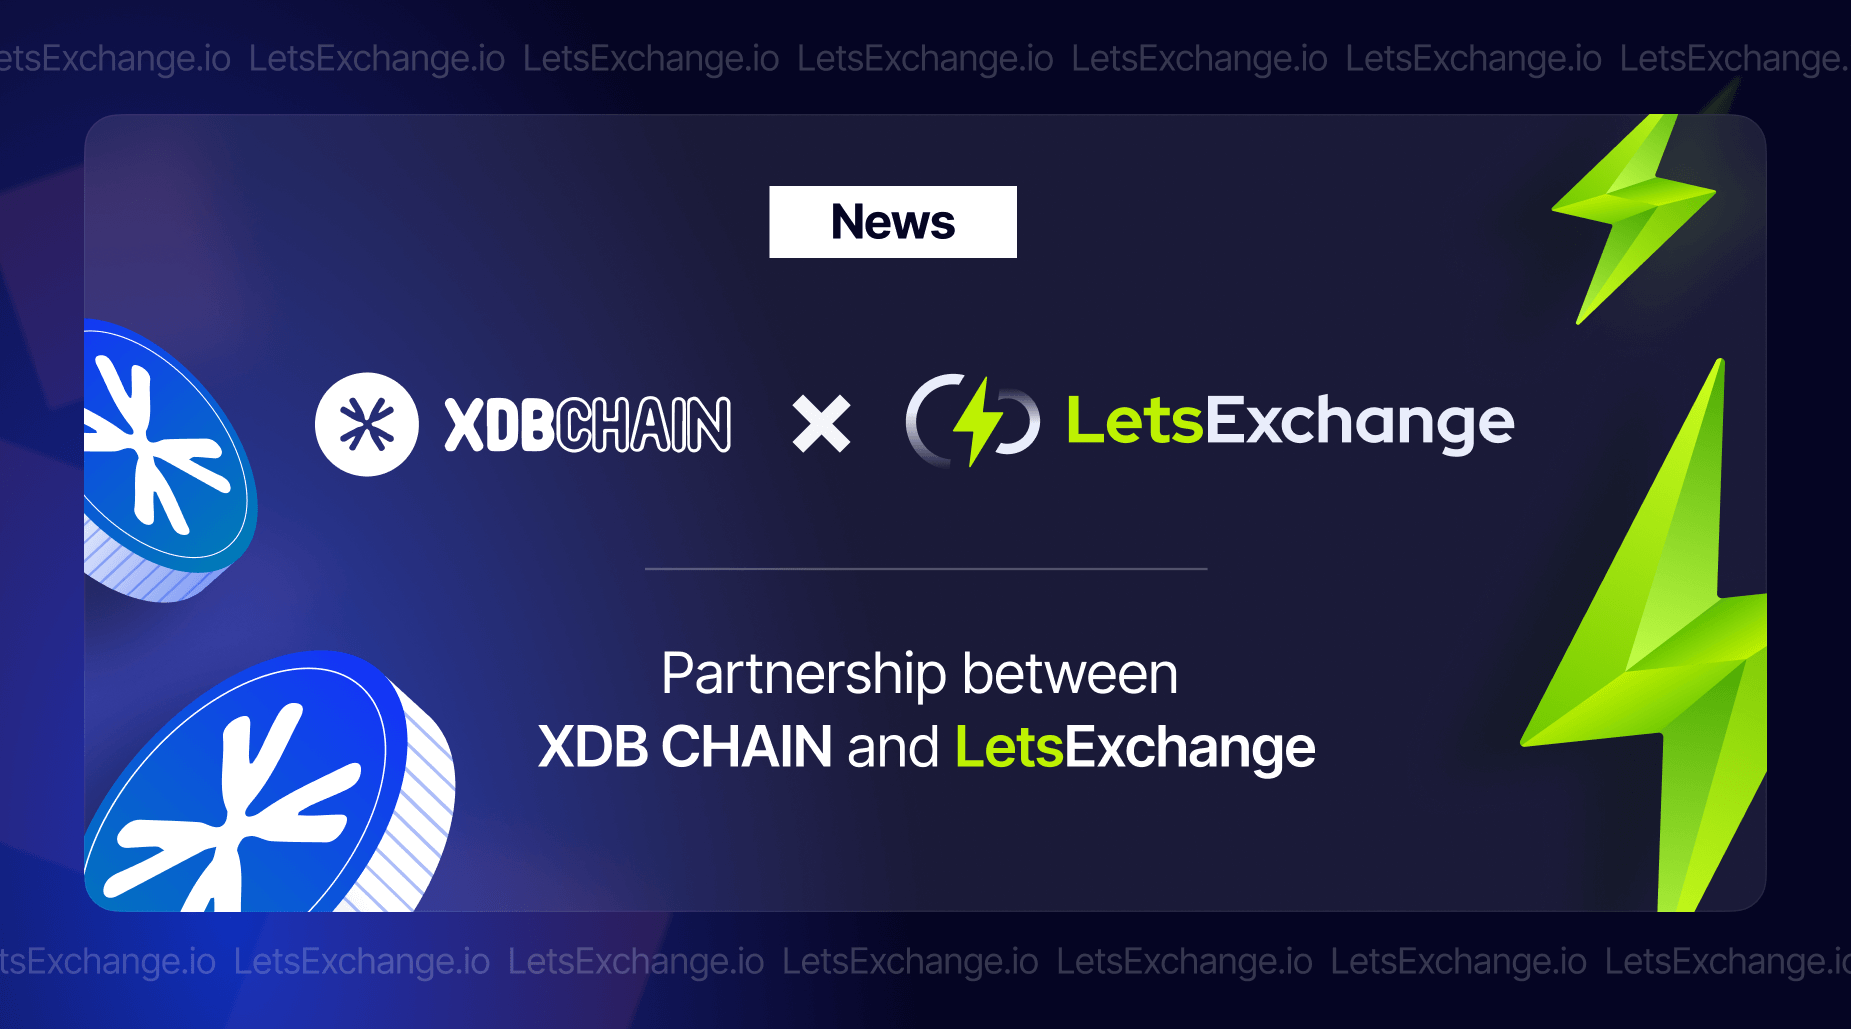 Partnership-between--XDB-CHAIN-and-LetsExchange-1.png